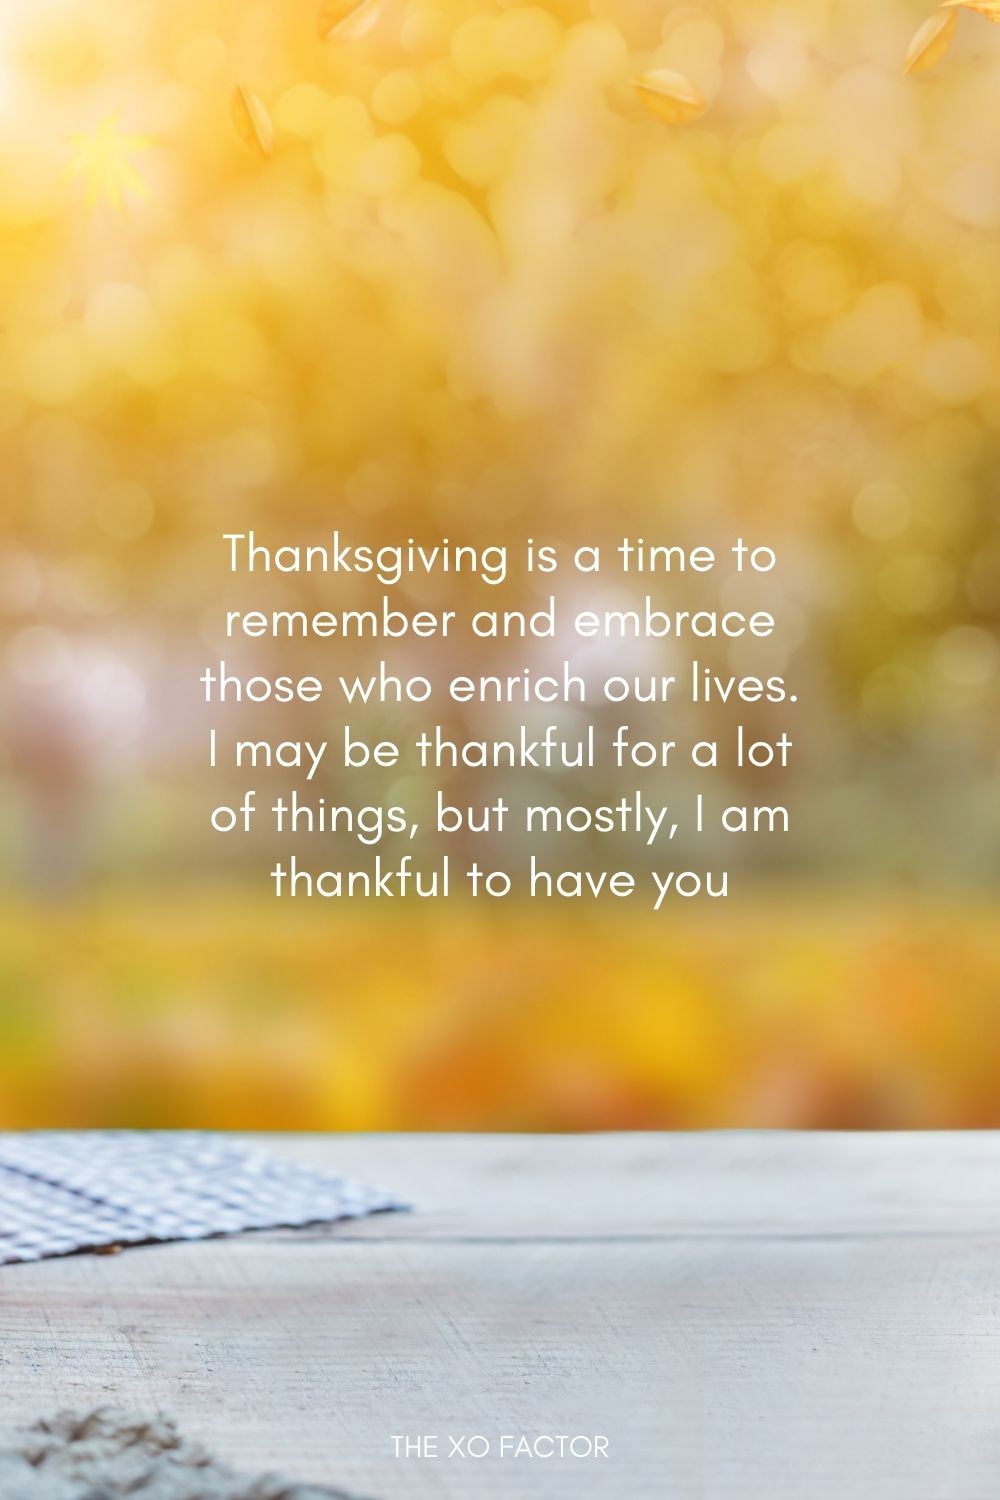 Thanksgiving is a time to remember and embrace those who enrich our lives. I may be thankful for a lot of things, but mostly, I am thankful to have you.